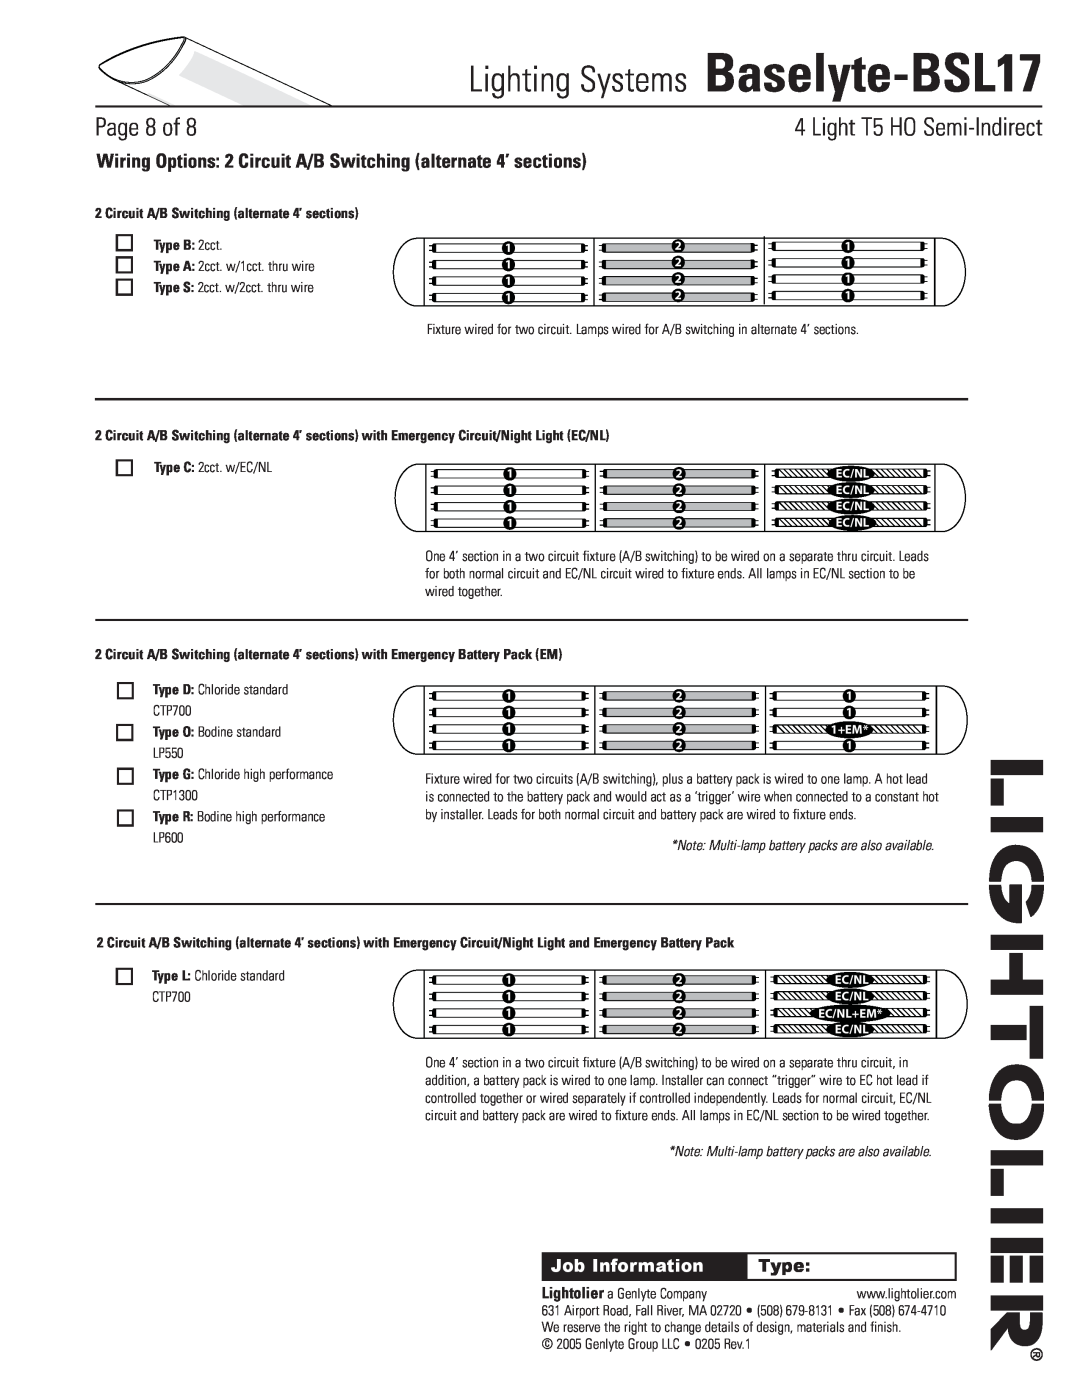 Lightolier Baselyte-BSL17 Circuit A/B Switching alternate 4’ sections, Type B 2cct, Type O Bodine standard LP550, Page of 